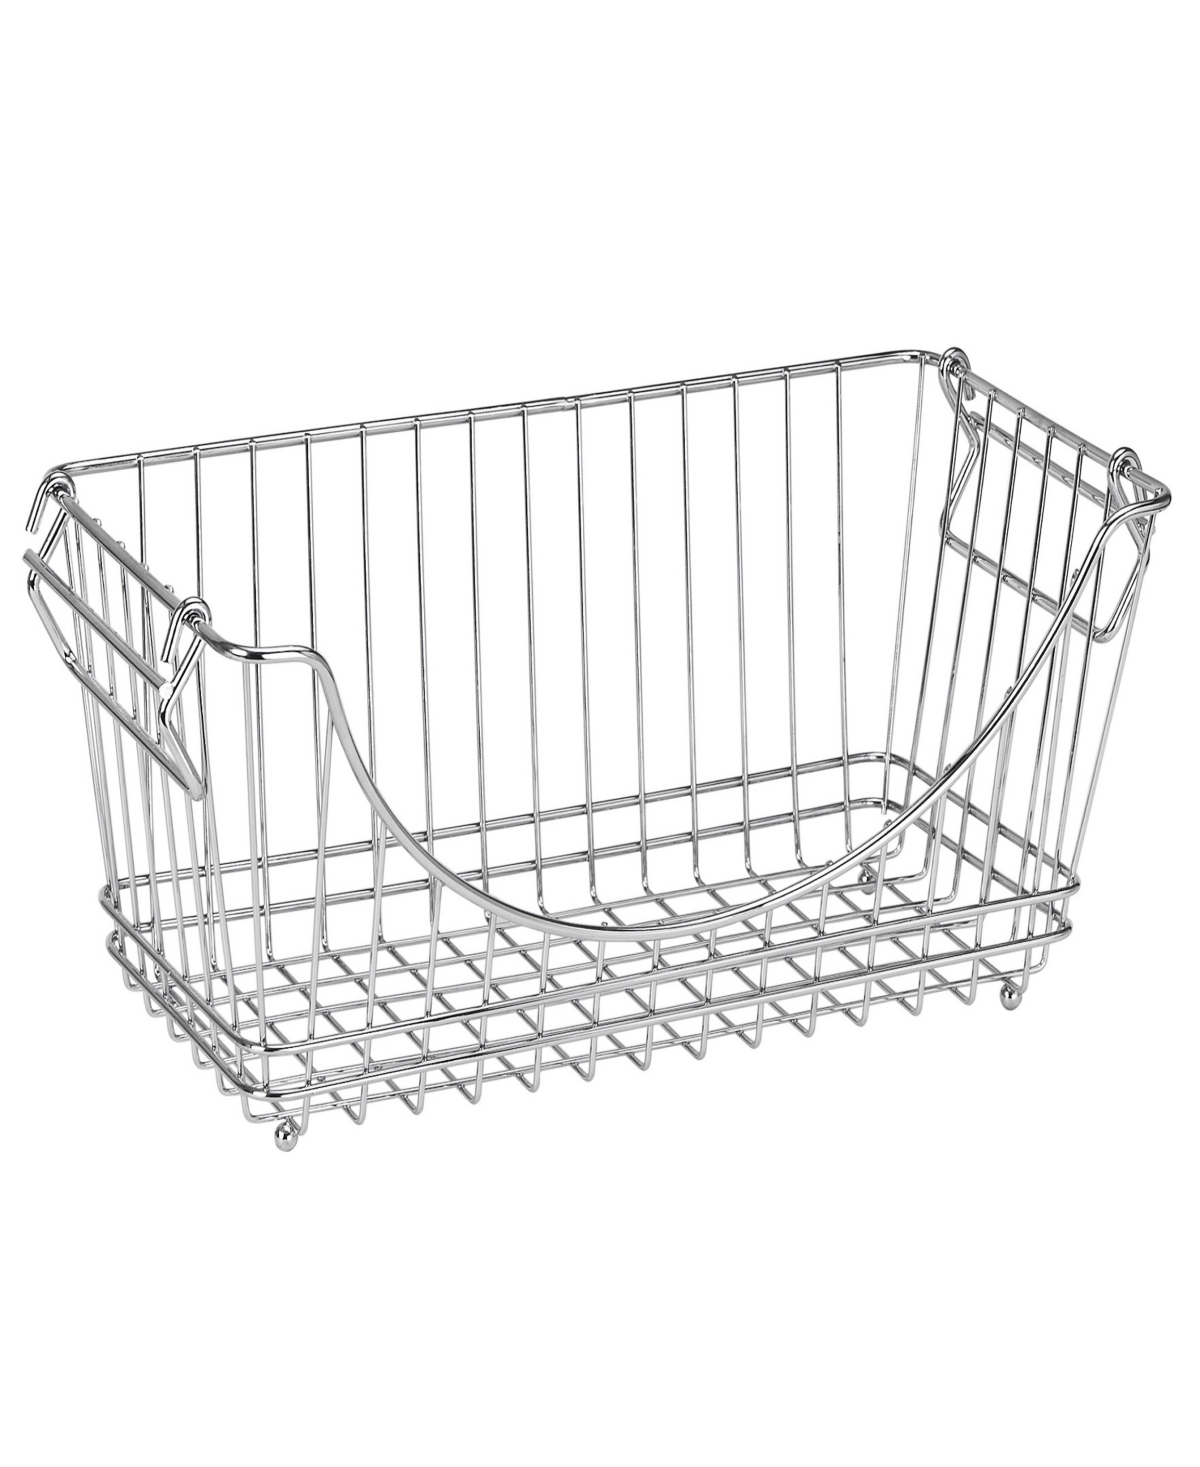 Shop Smart Design Set Of 2 Medium Stacking Baskets With Handles, 12.63" X 5.5" In Chrome